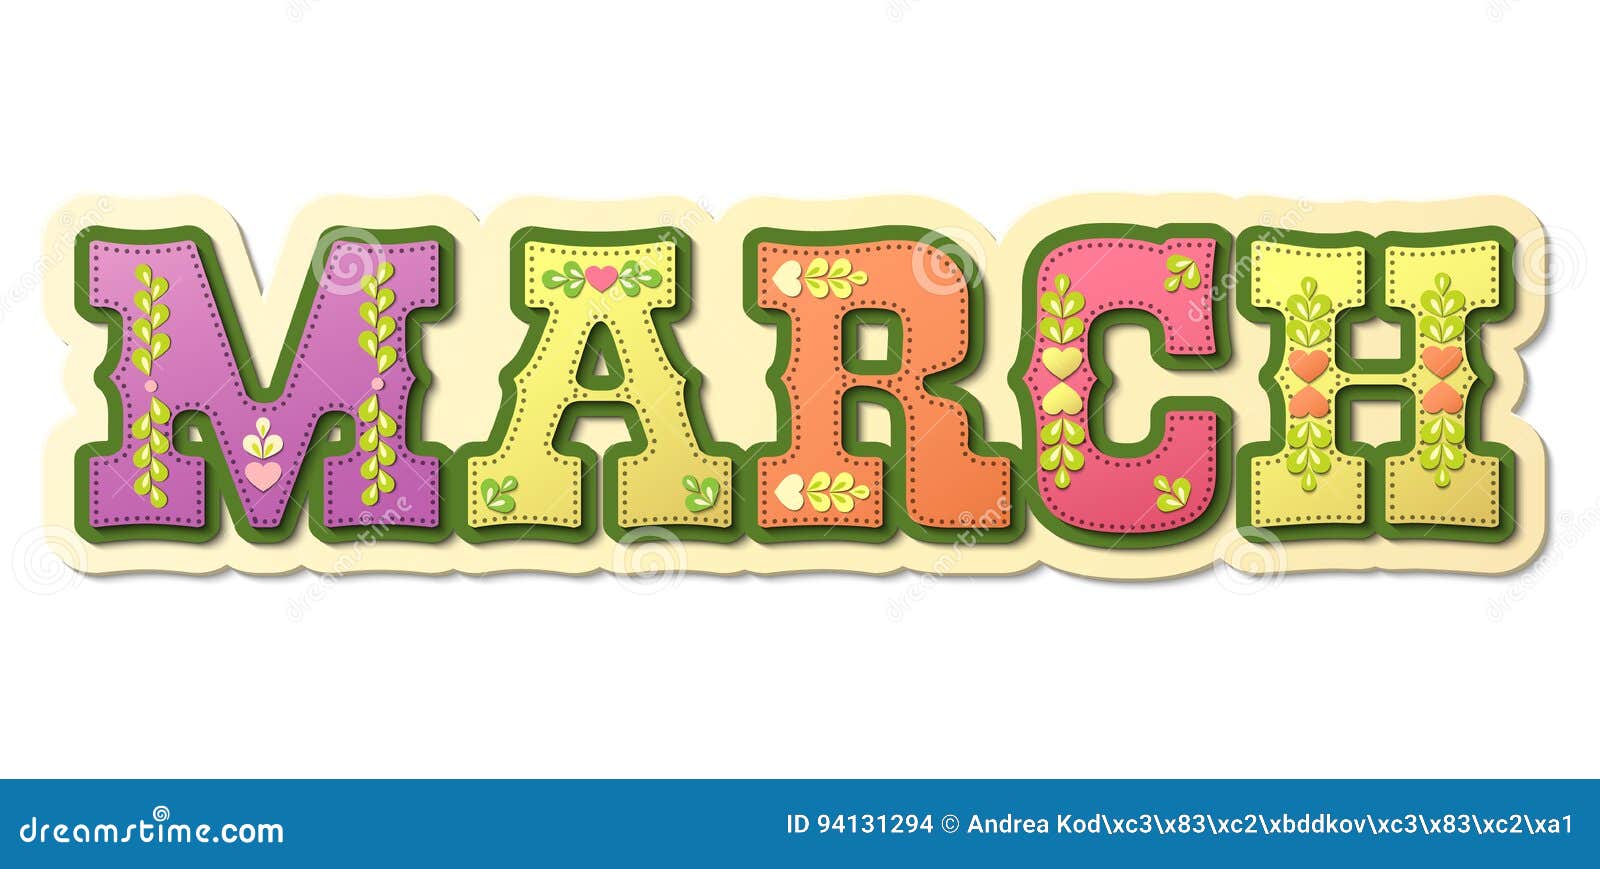 march, illustrated name of calendar month, 